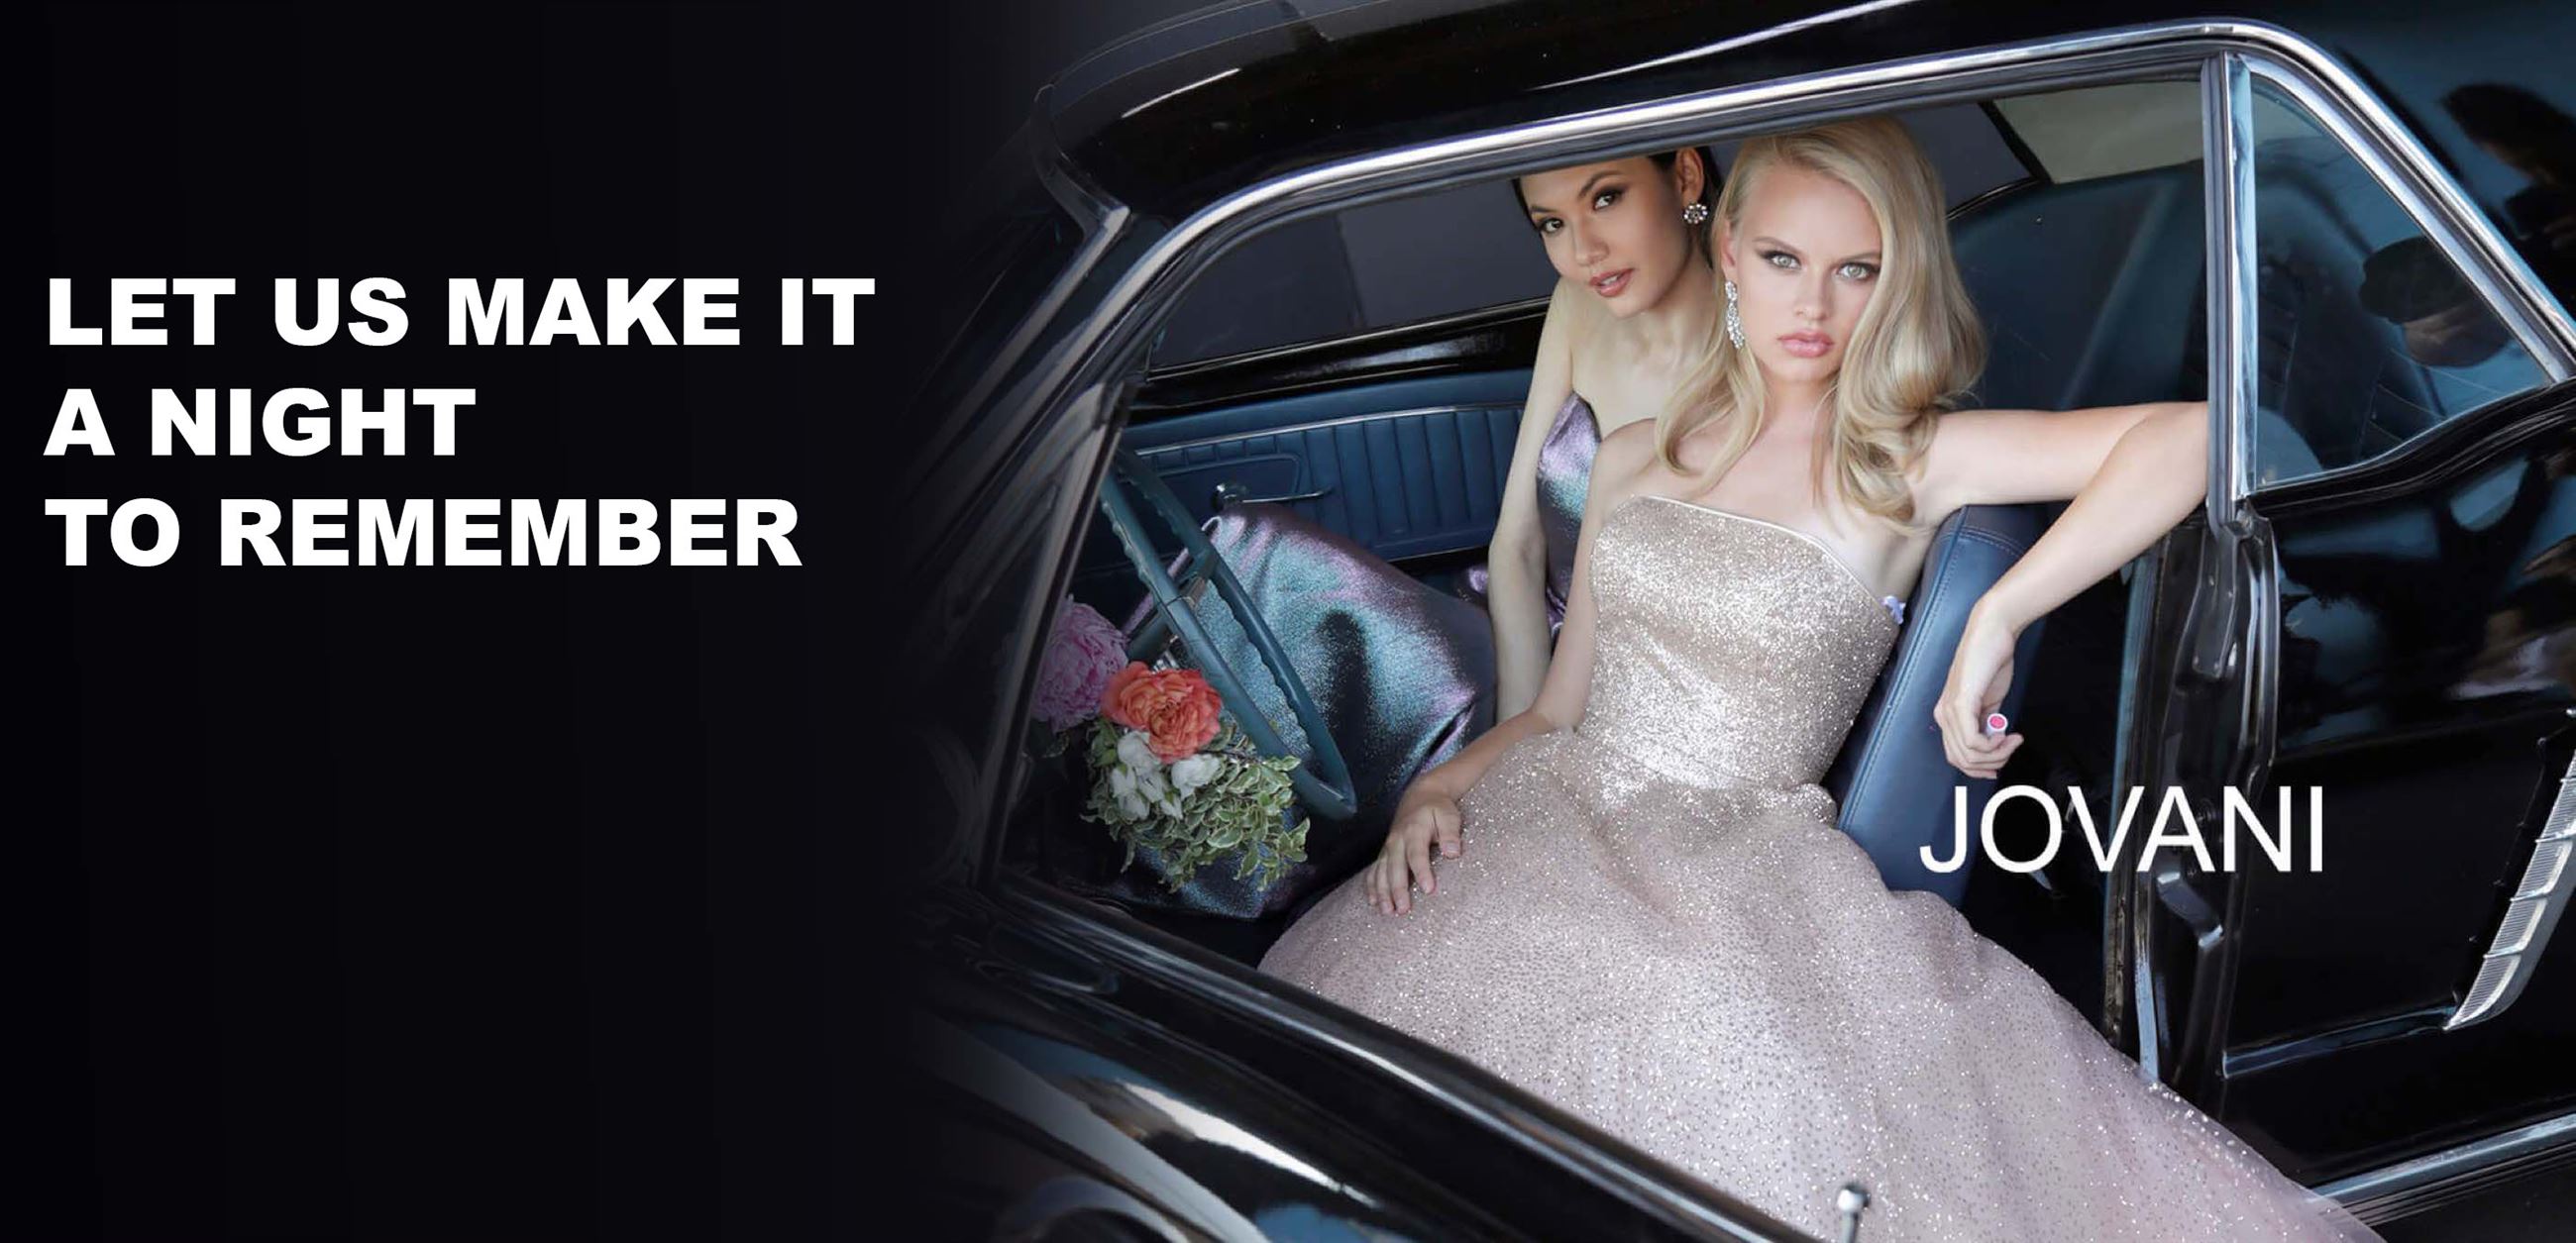 Two models in Jovani dresses sitting in a car